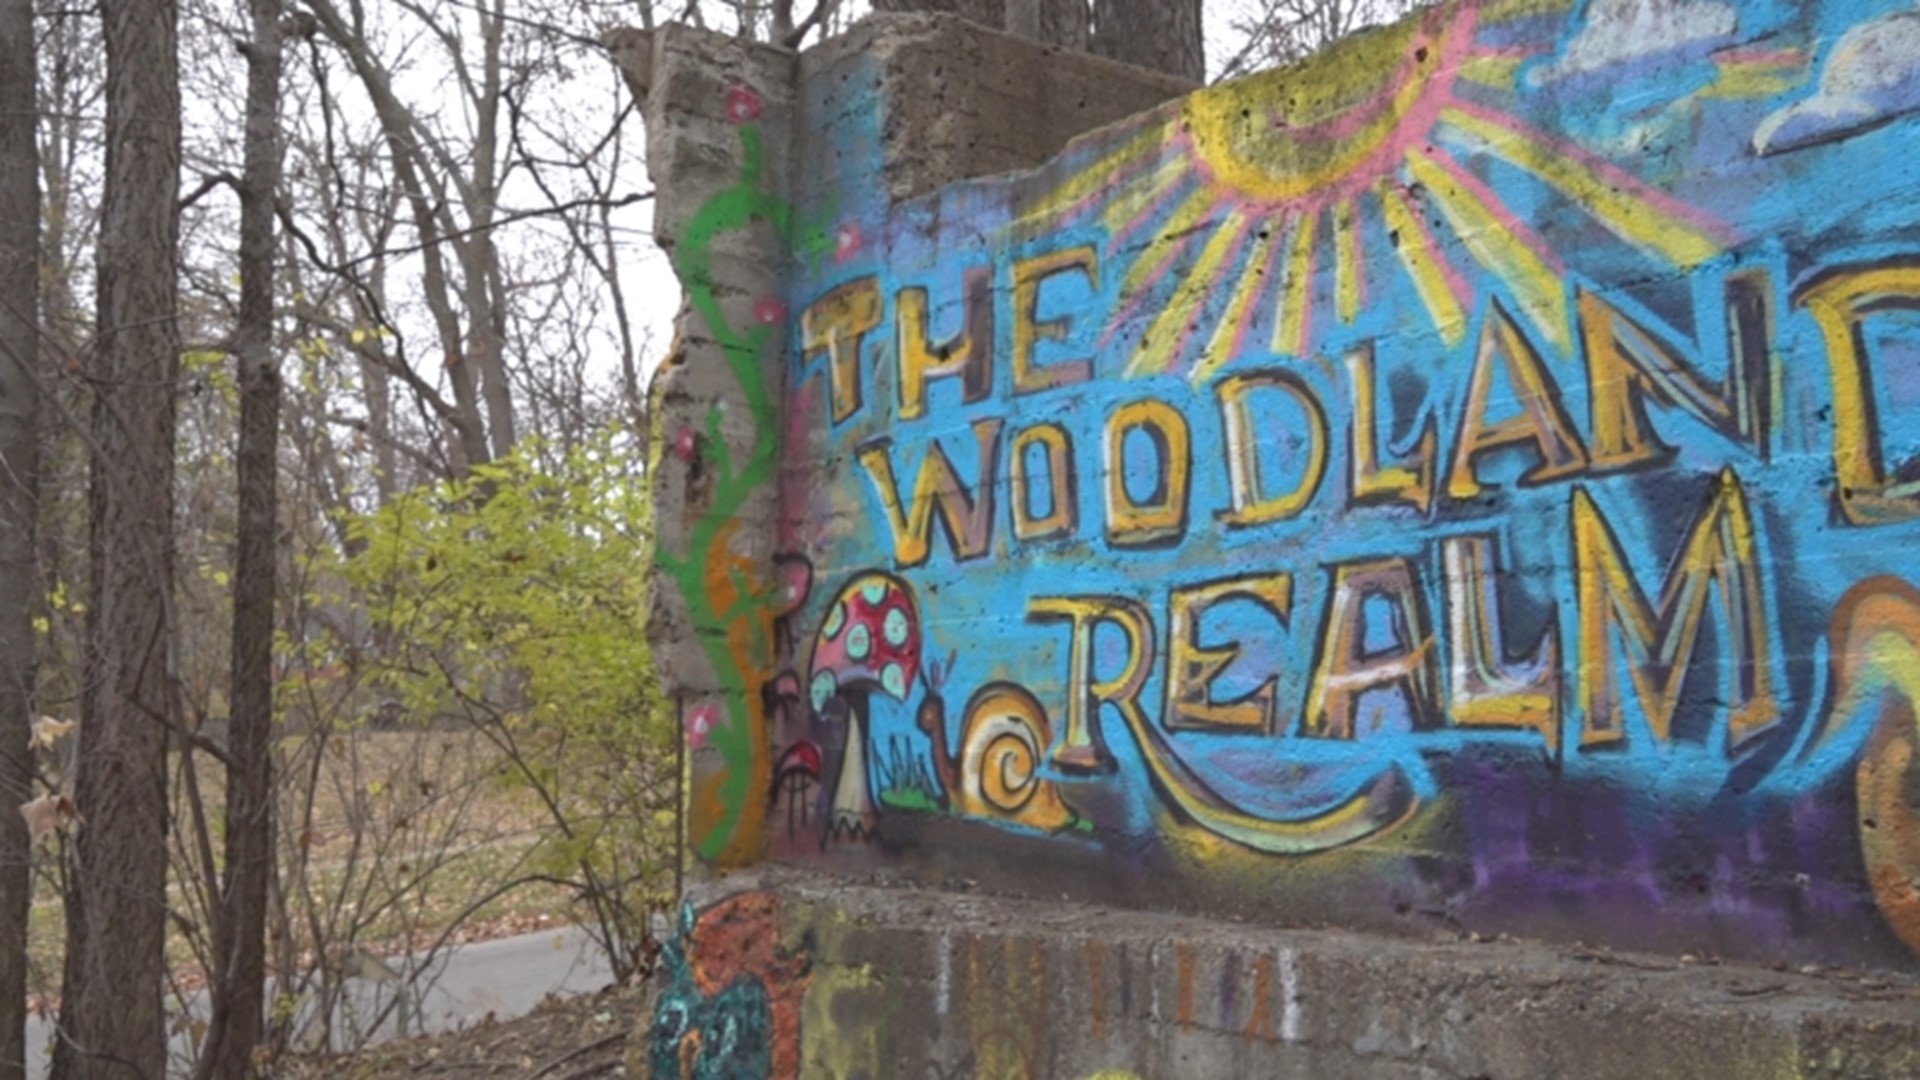 In July, The Woodland Realm got a zoning notice for an infrastructure requirement after a neighbor filed a complaint saying it looked like a homeless camp.